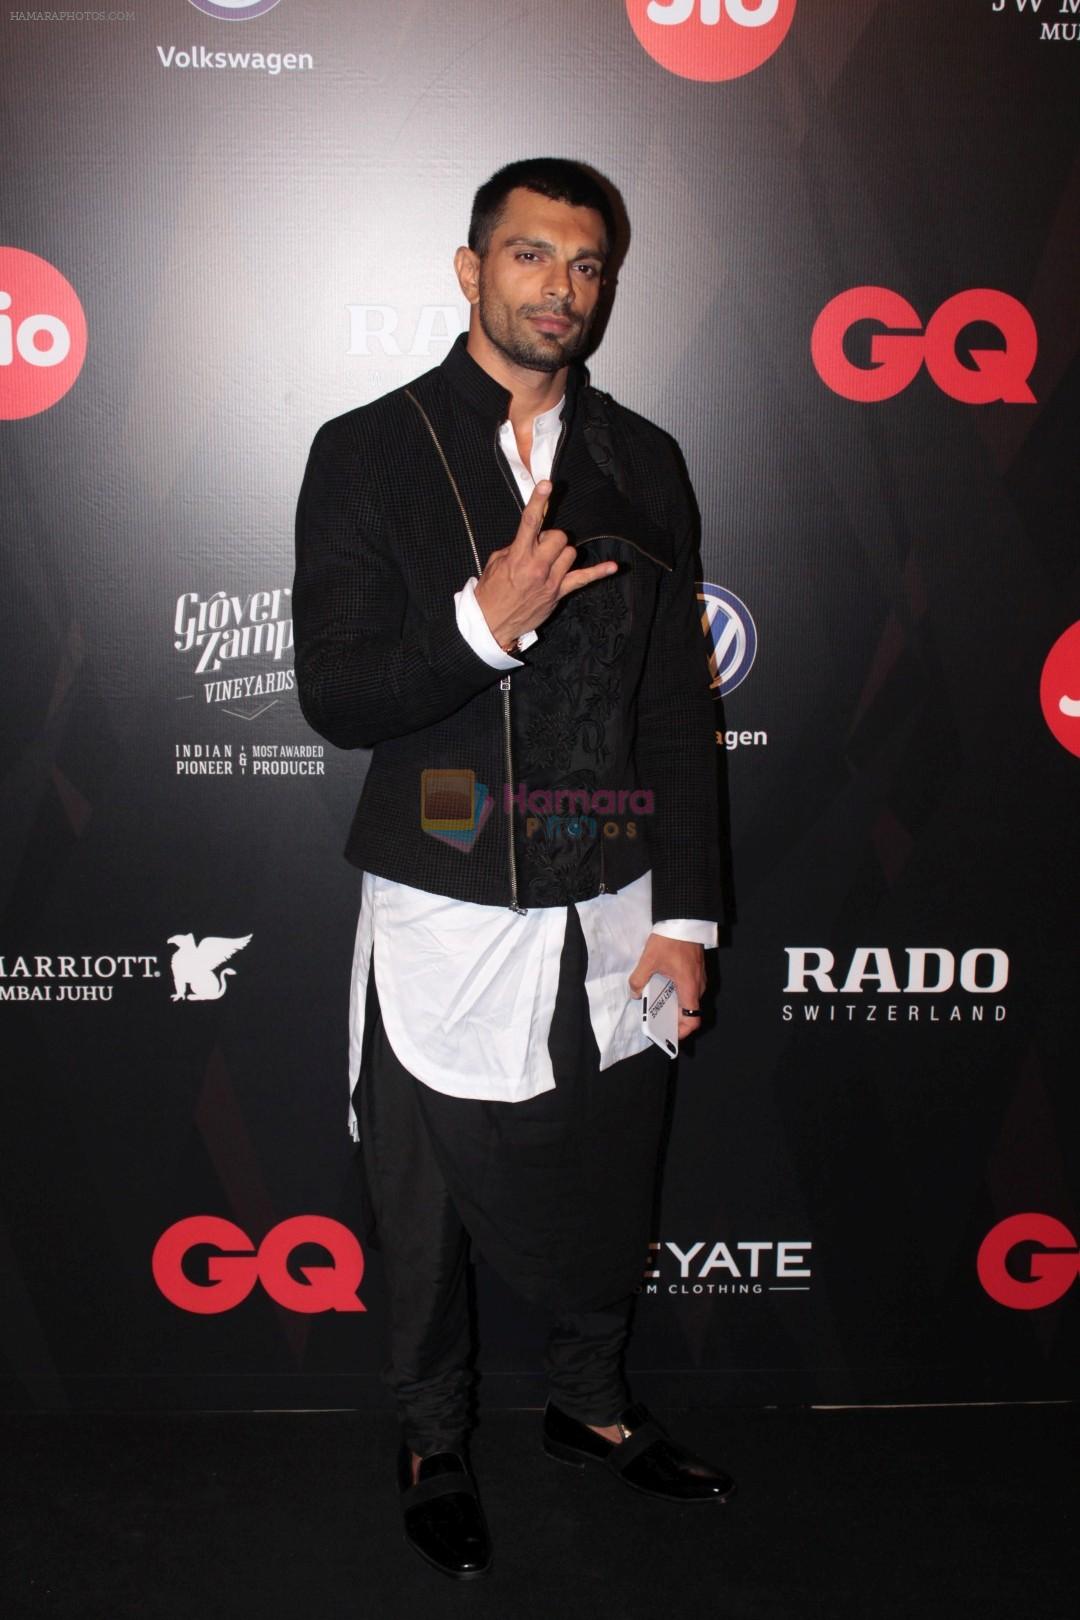 Karan Singh Grover at Star Studded Red Carpet For GQ Best Dressed 2017 on 4th June 2017